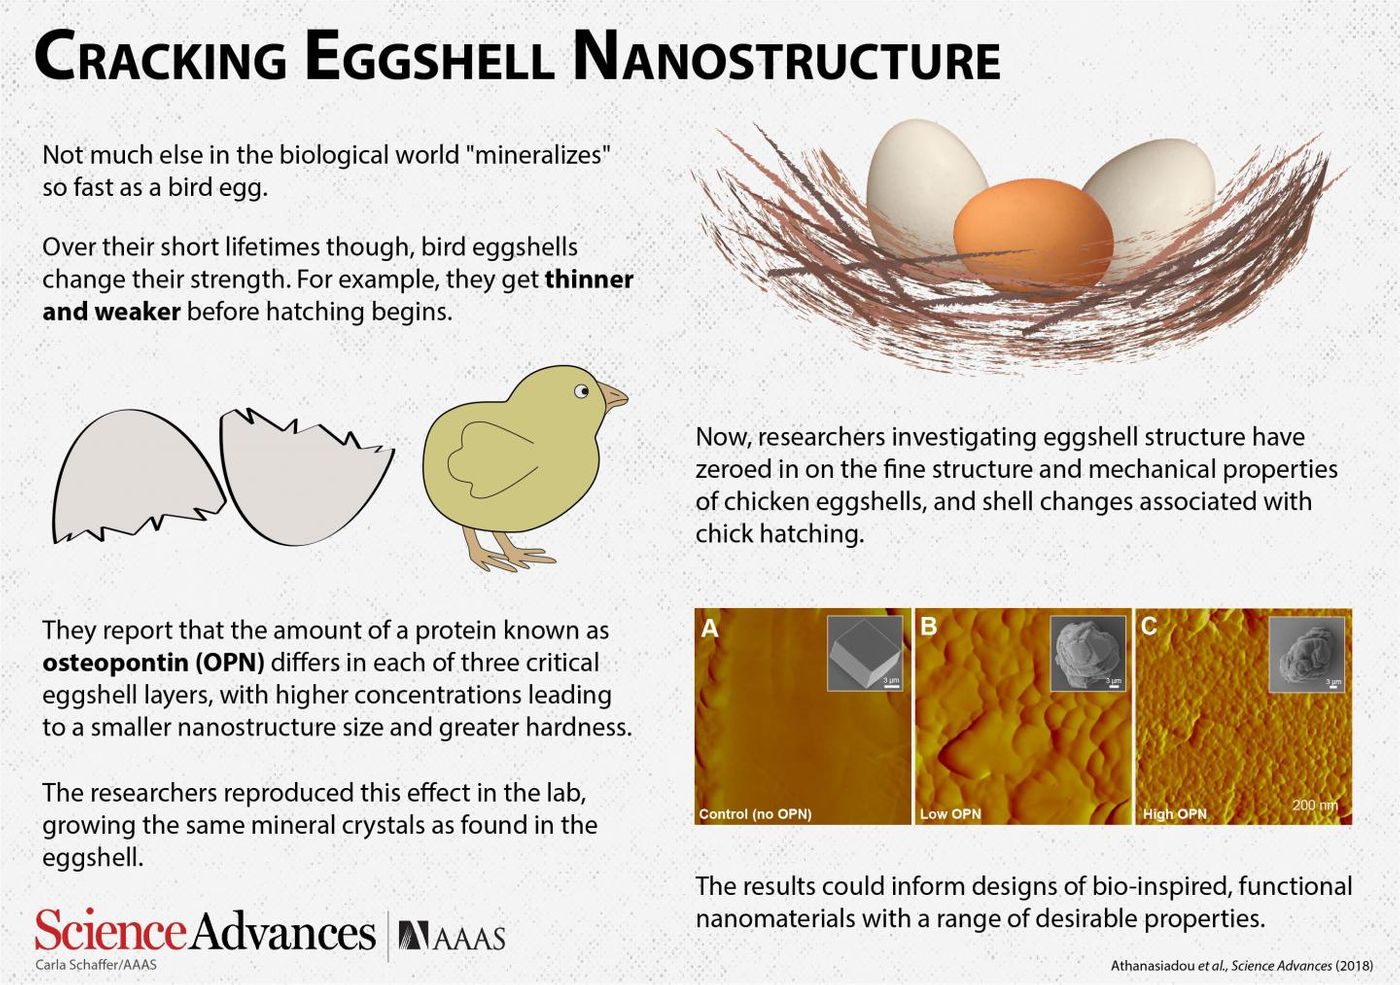 Over their short lifetimes though, bird eggshells change their strength. For example, they get thinner and weaker before hatching begins. Now, researchers investigating eggshell structure have zeroed in on the fine structure and mechanical properties of chicken eggshells, and shell changes associated with chick hatching. / Credit: Carla Schaffer/ AAAS